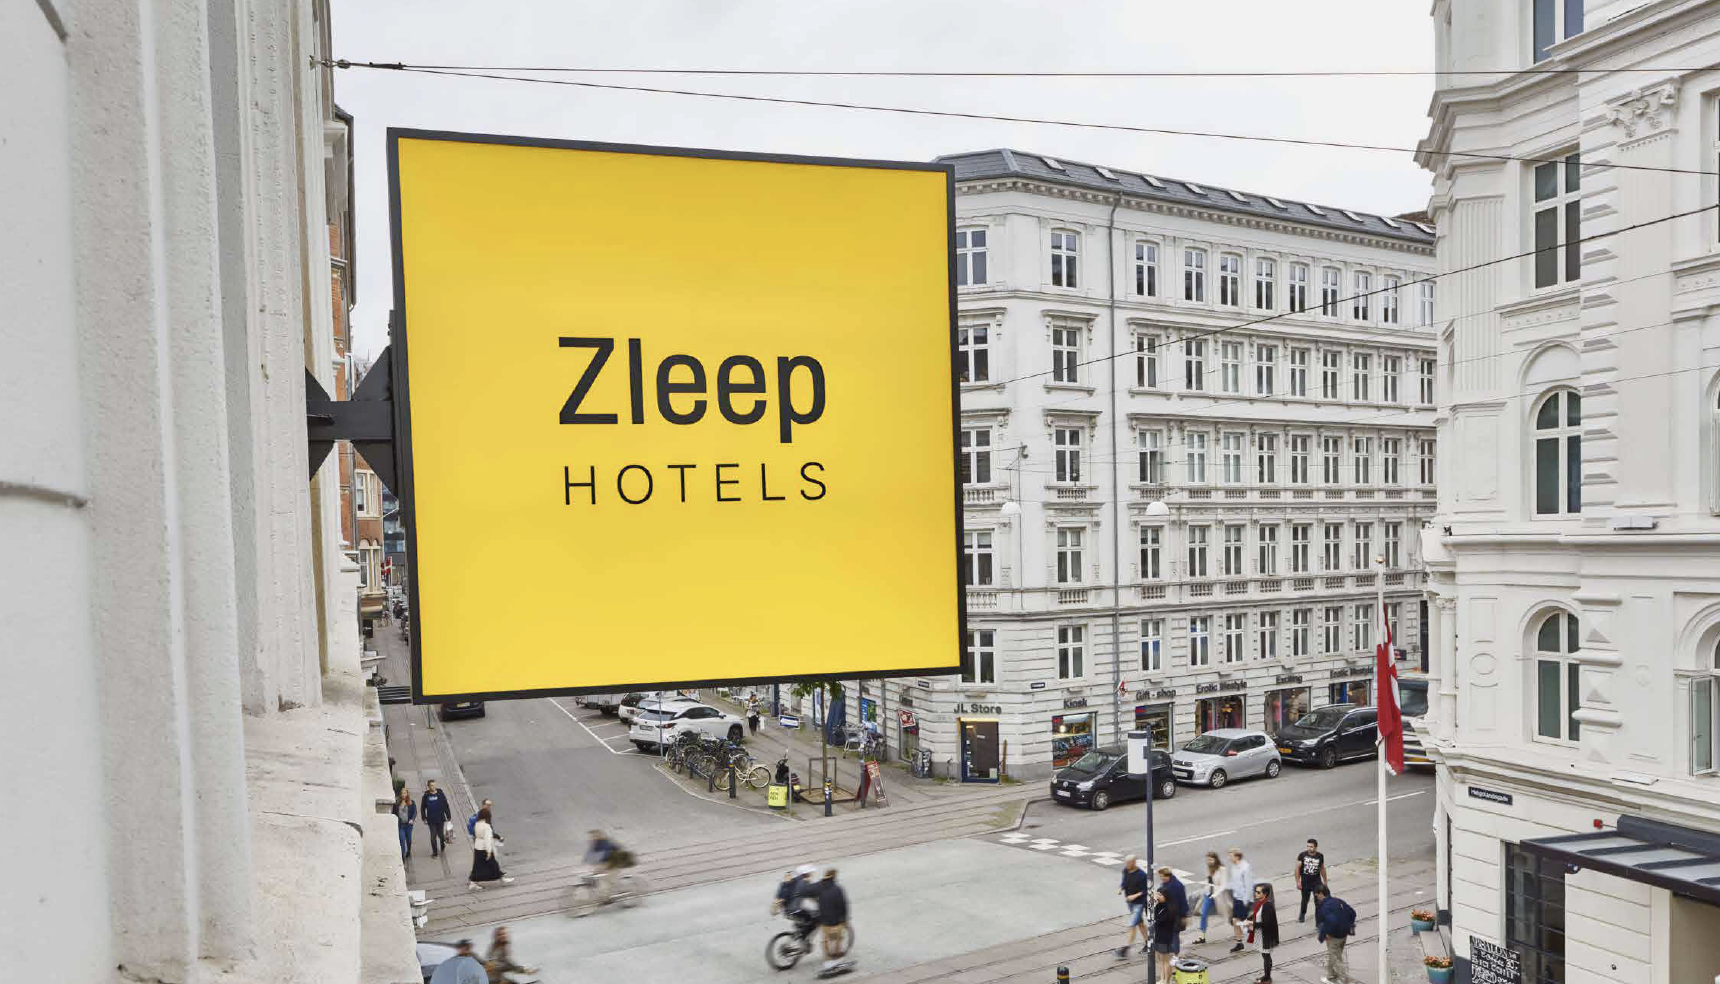 Introducing Scandi Simplicity to the Budget Hotel Market Through a Solid Brand Foundation